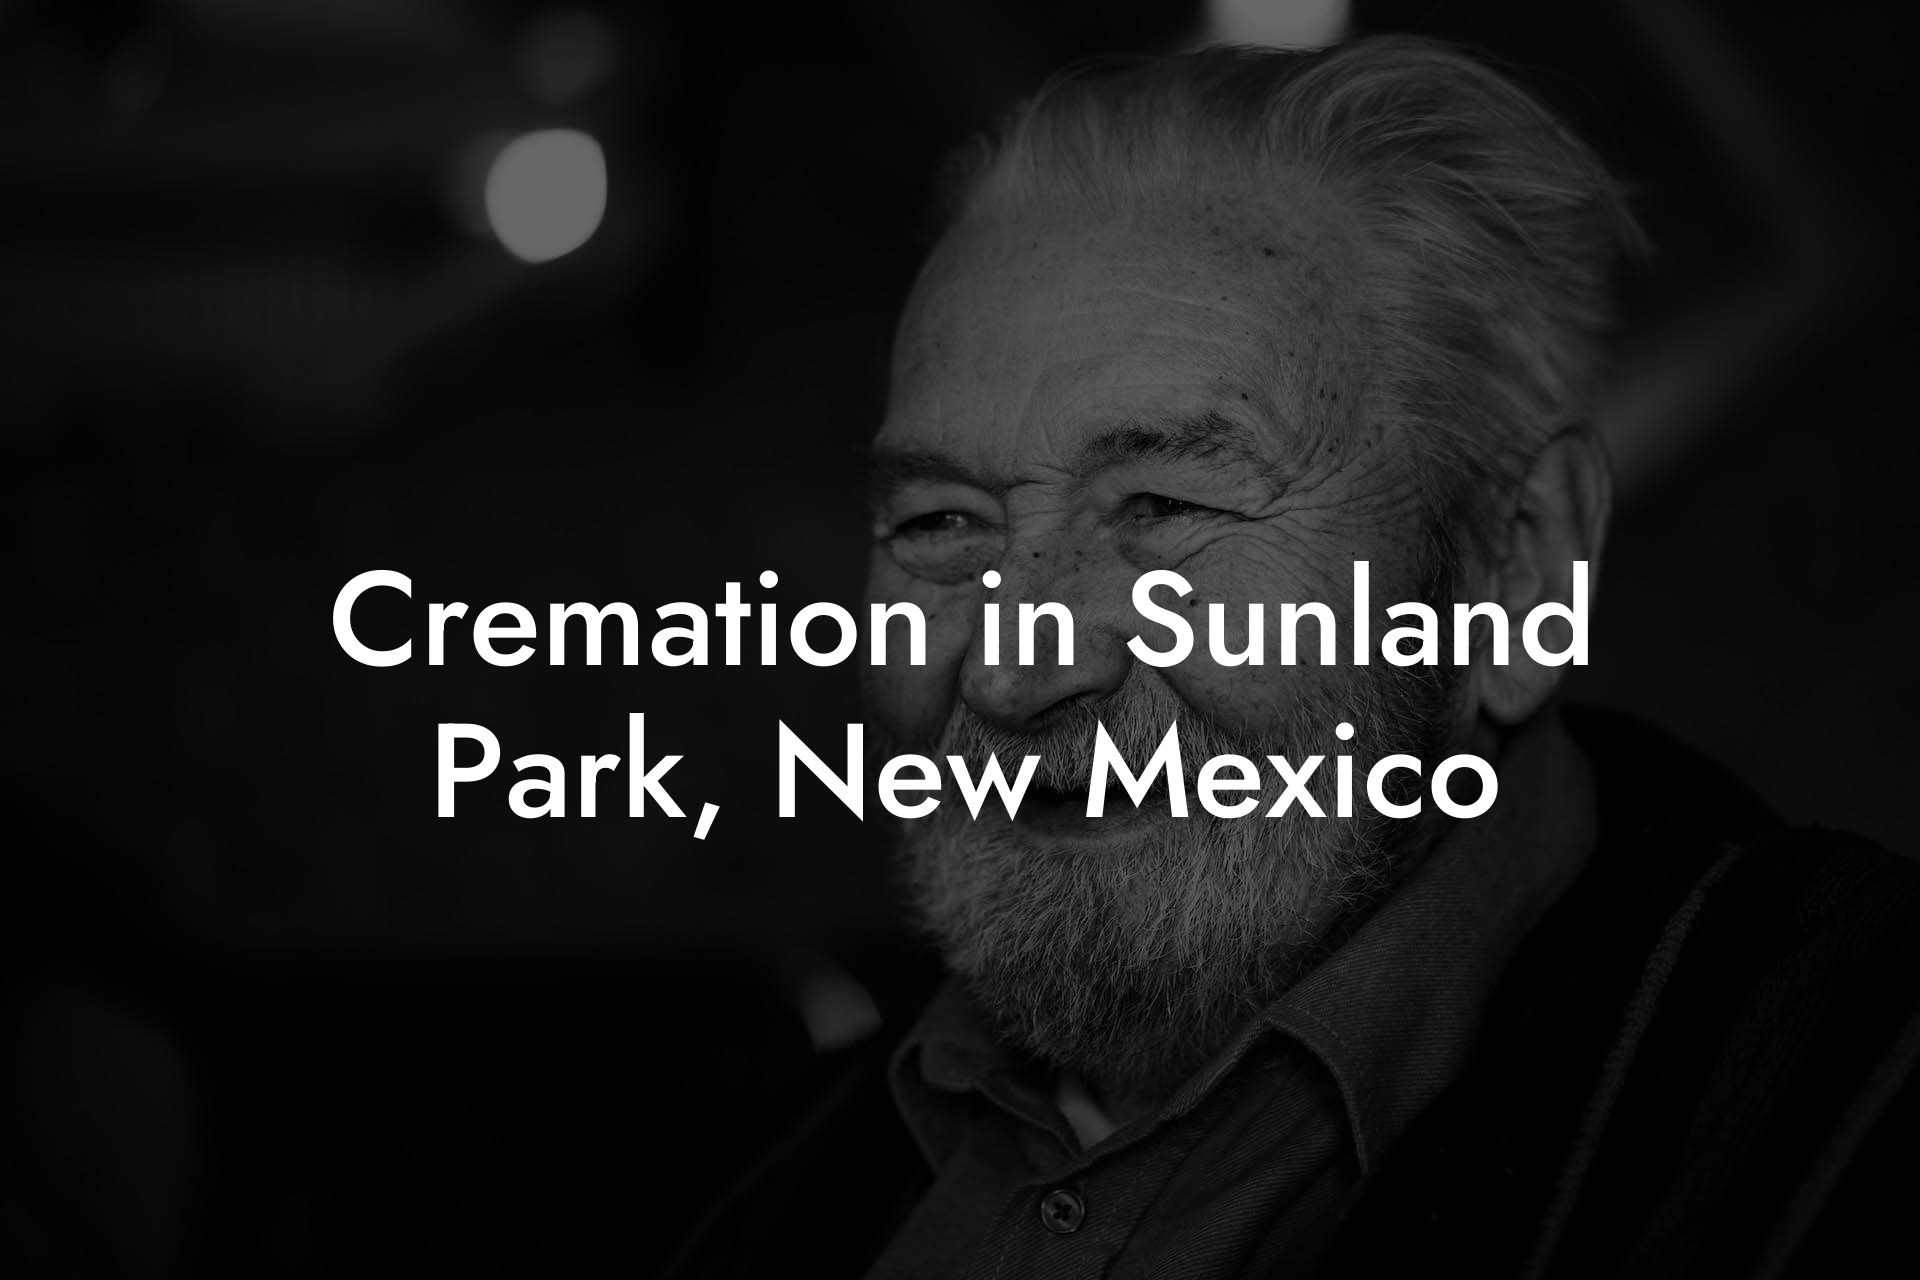 Cremation in Sunland Park, New Mexico